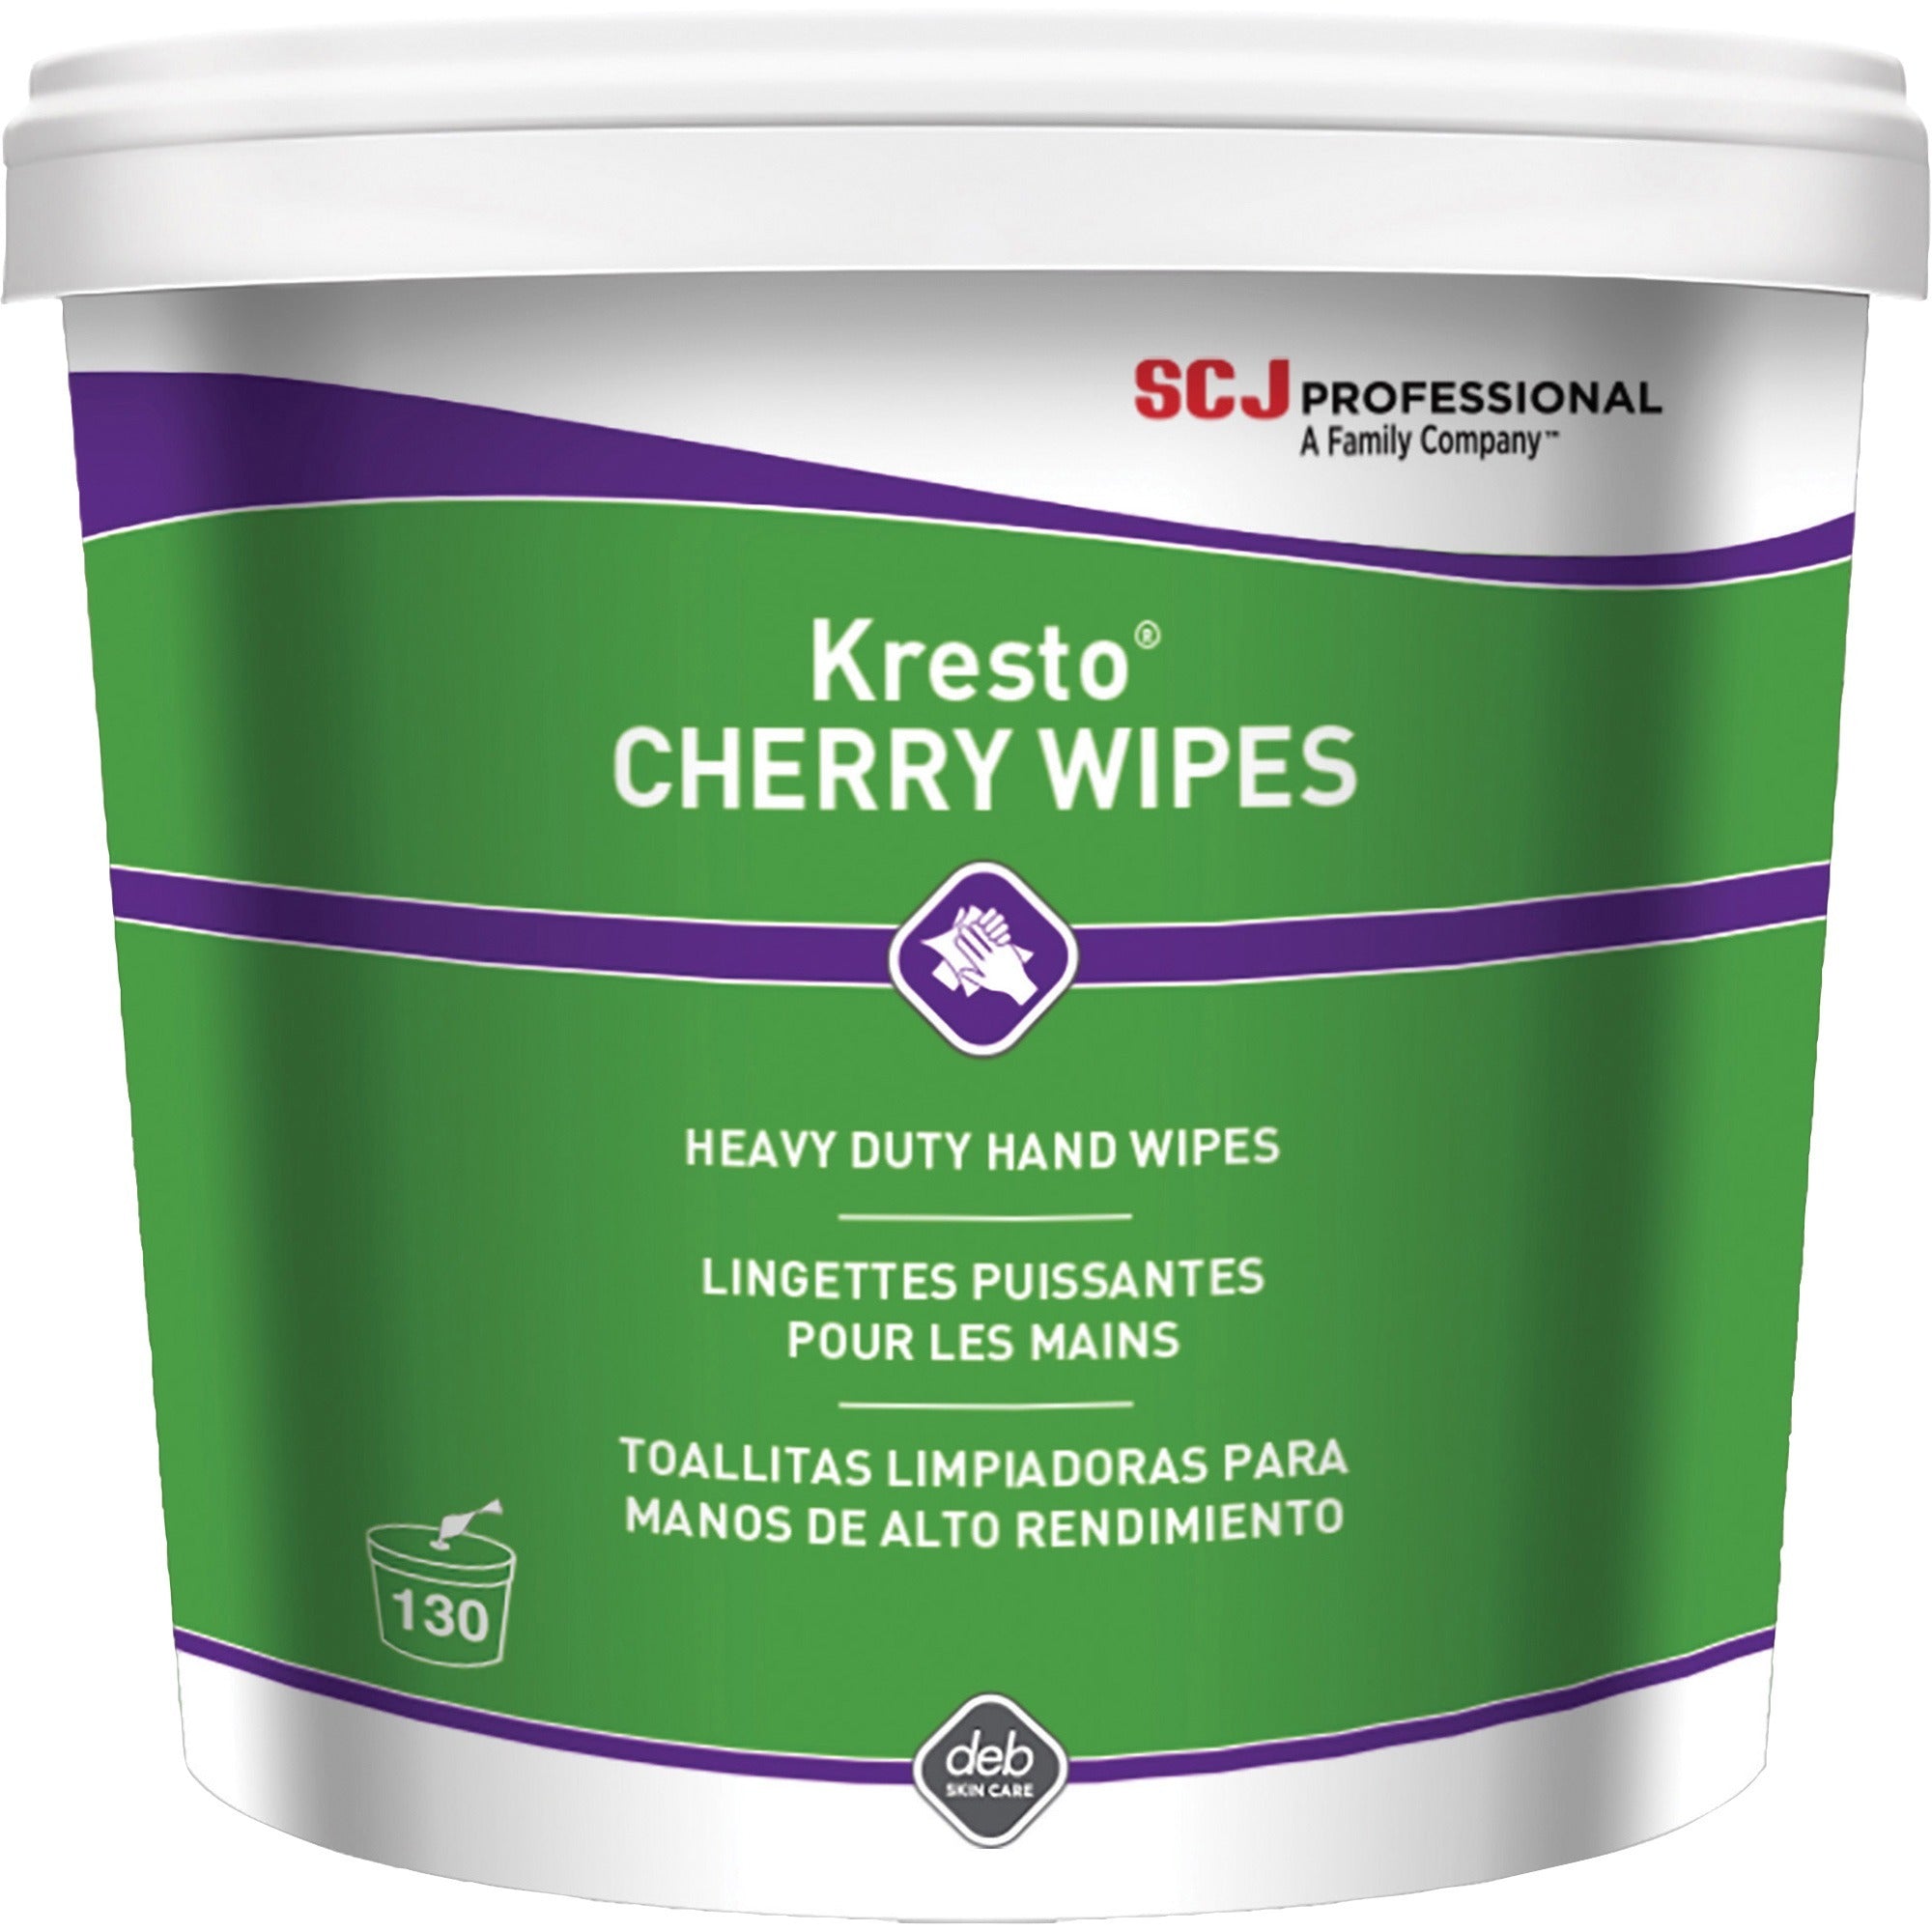 sc-johnson-kresto-heavy-duty-xl-hand-wipes-cherry-10-x-12-white-red-polypropylene-silicone-free-non-toxic-easy-to-use-absorbent-silicone-free-heavy-duty-smooth-anti-contamination-for-hand-skin-130-per-canister-4-carton_sjnkcw130wct - 2